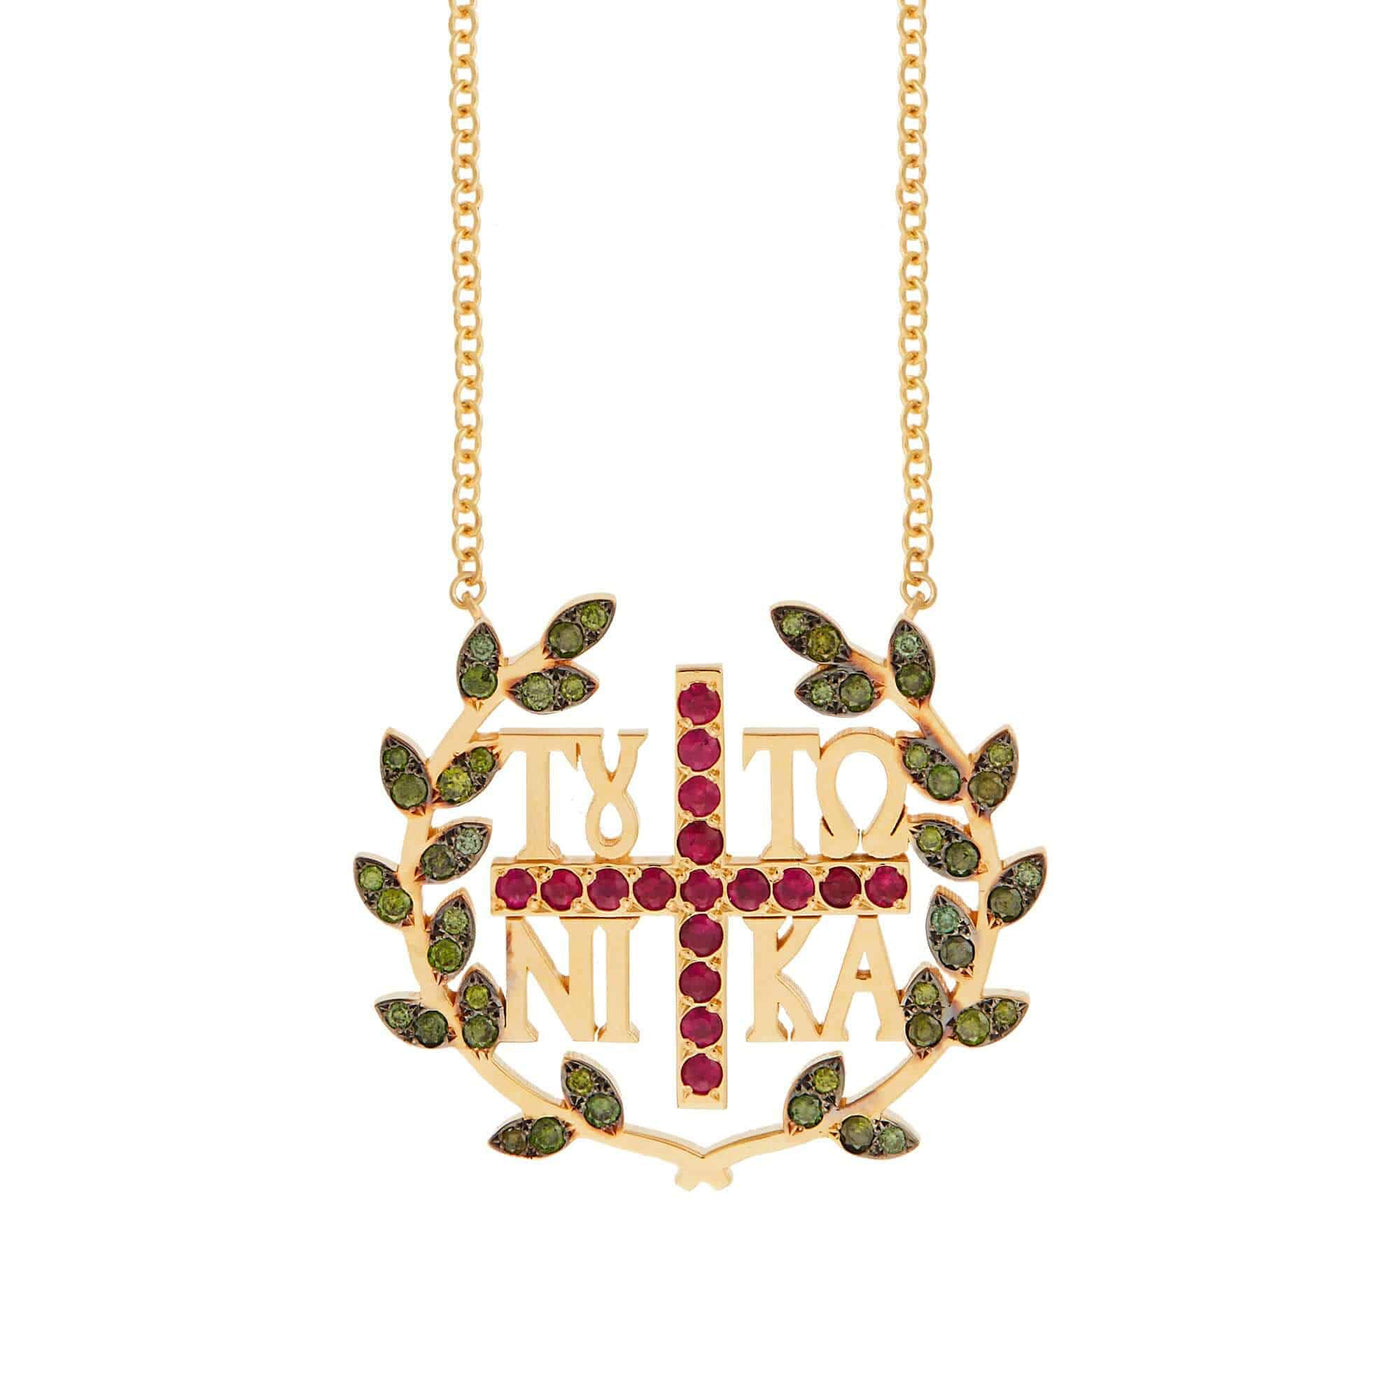 In this sign conquer Necklace - 1821 Liberty - Ileana Makri store